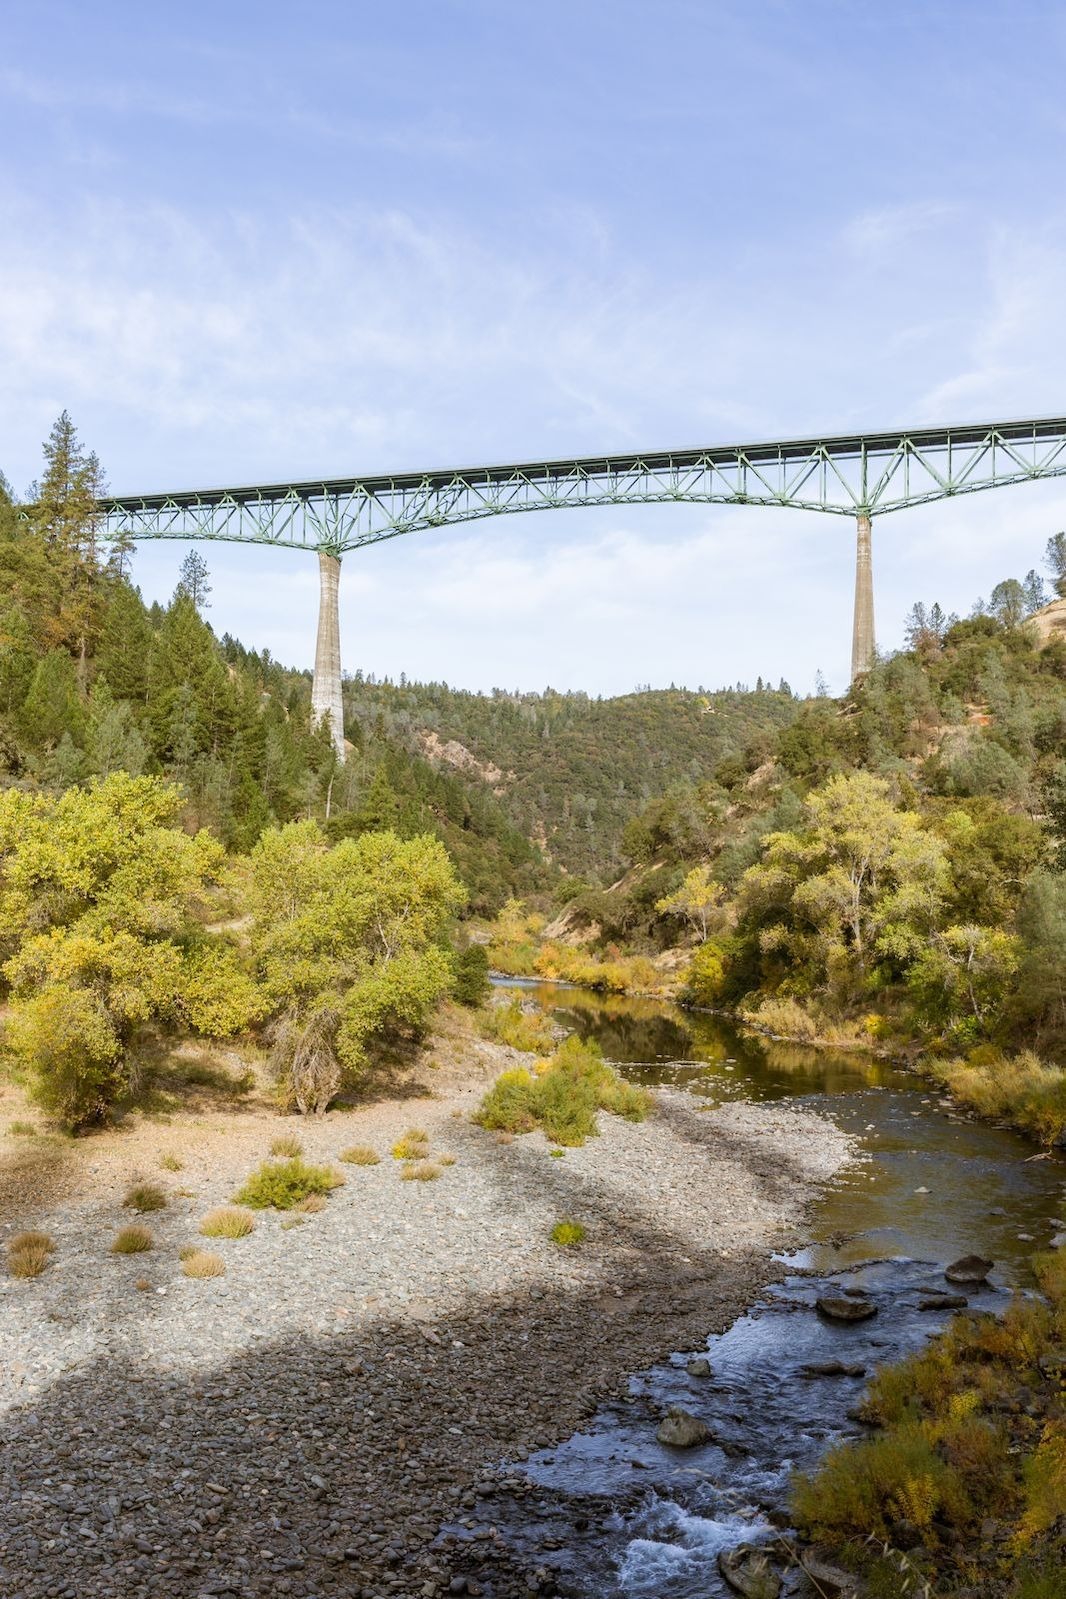 Bridge over a trail and river in California's Gold Country